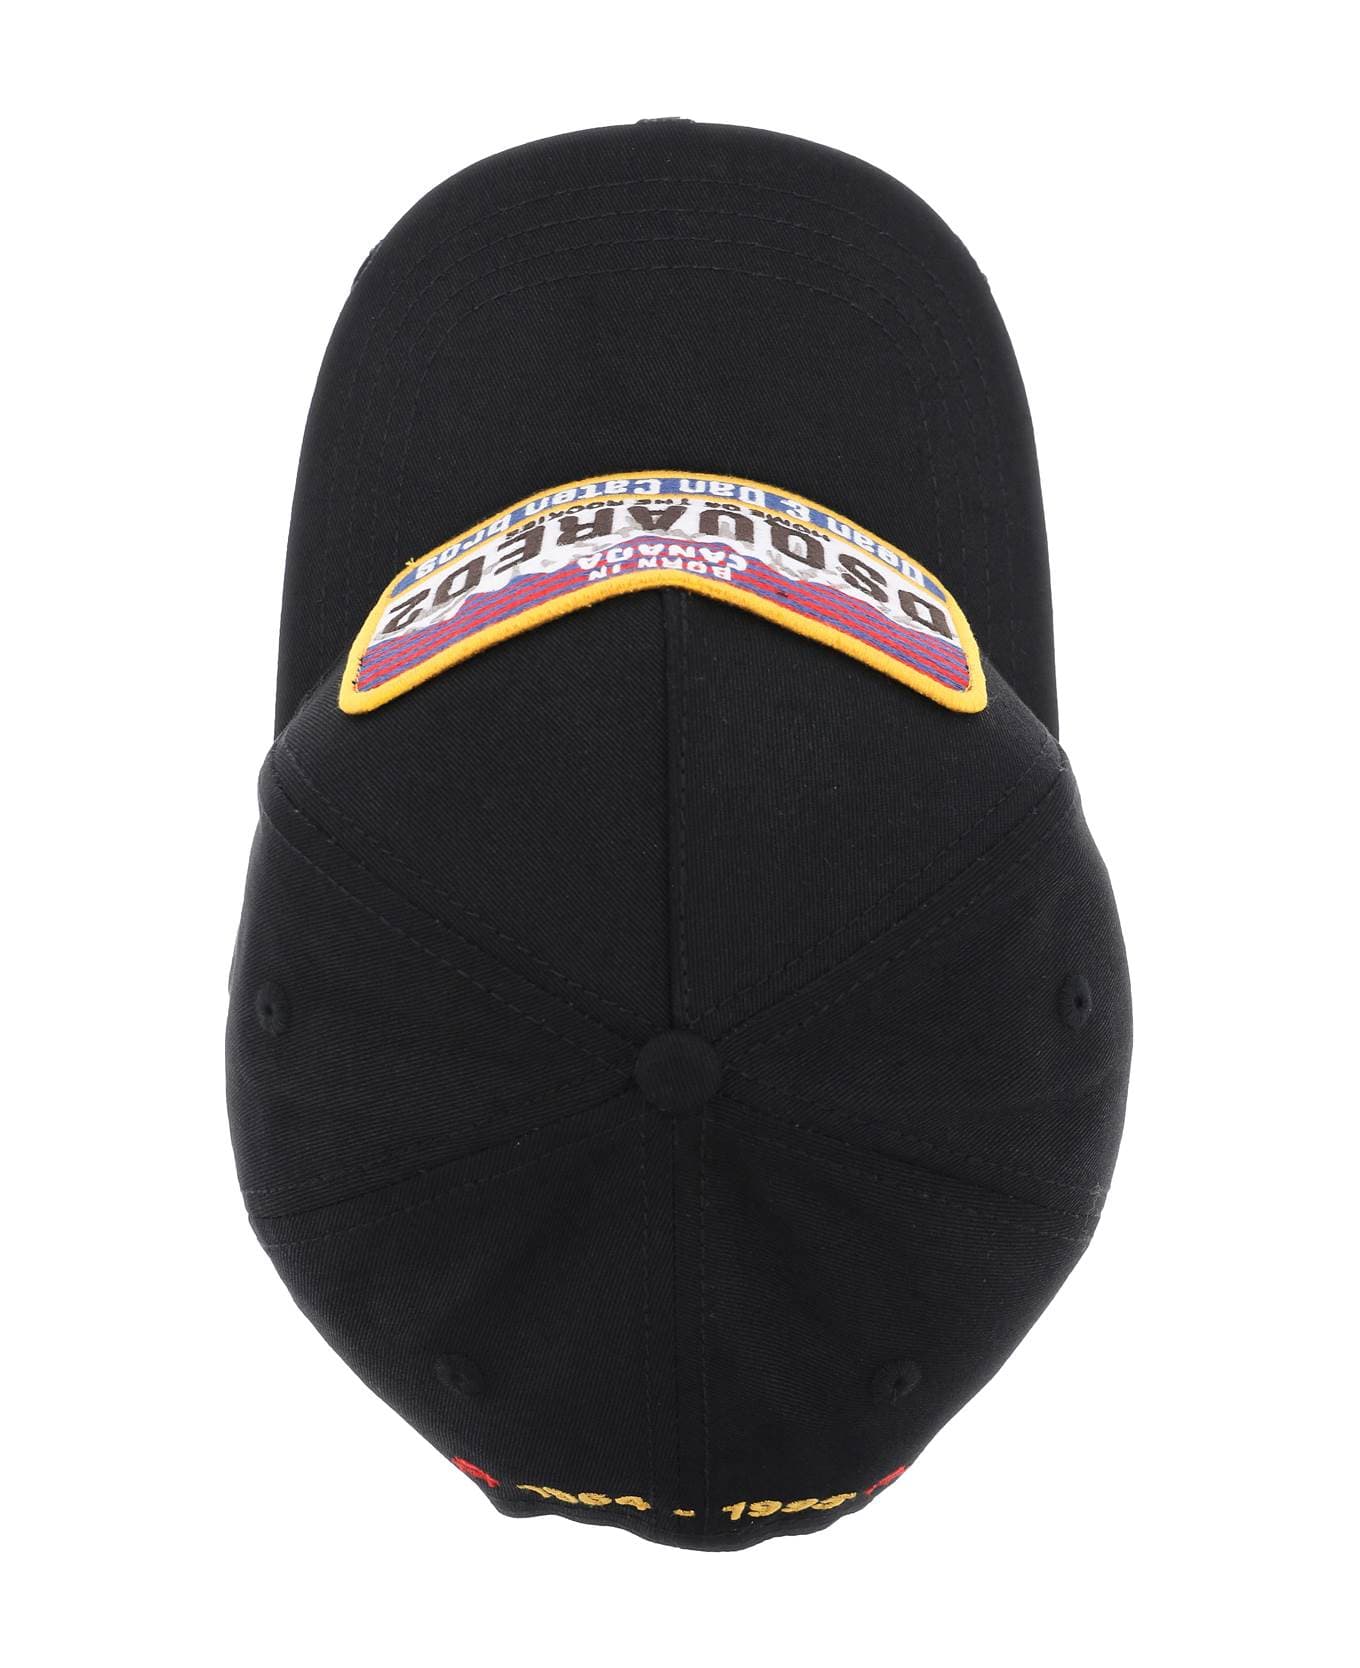 Dsquared2 Baseball Cap With Logoed Patch - BLACK (Black) 帽子